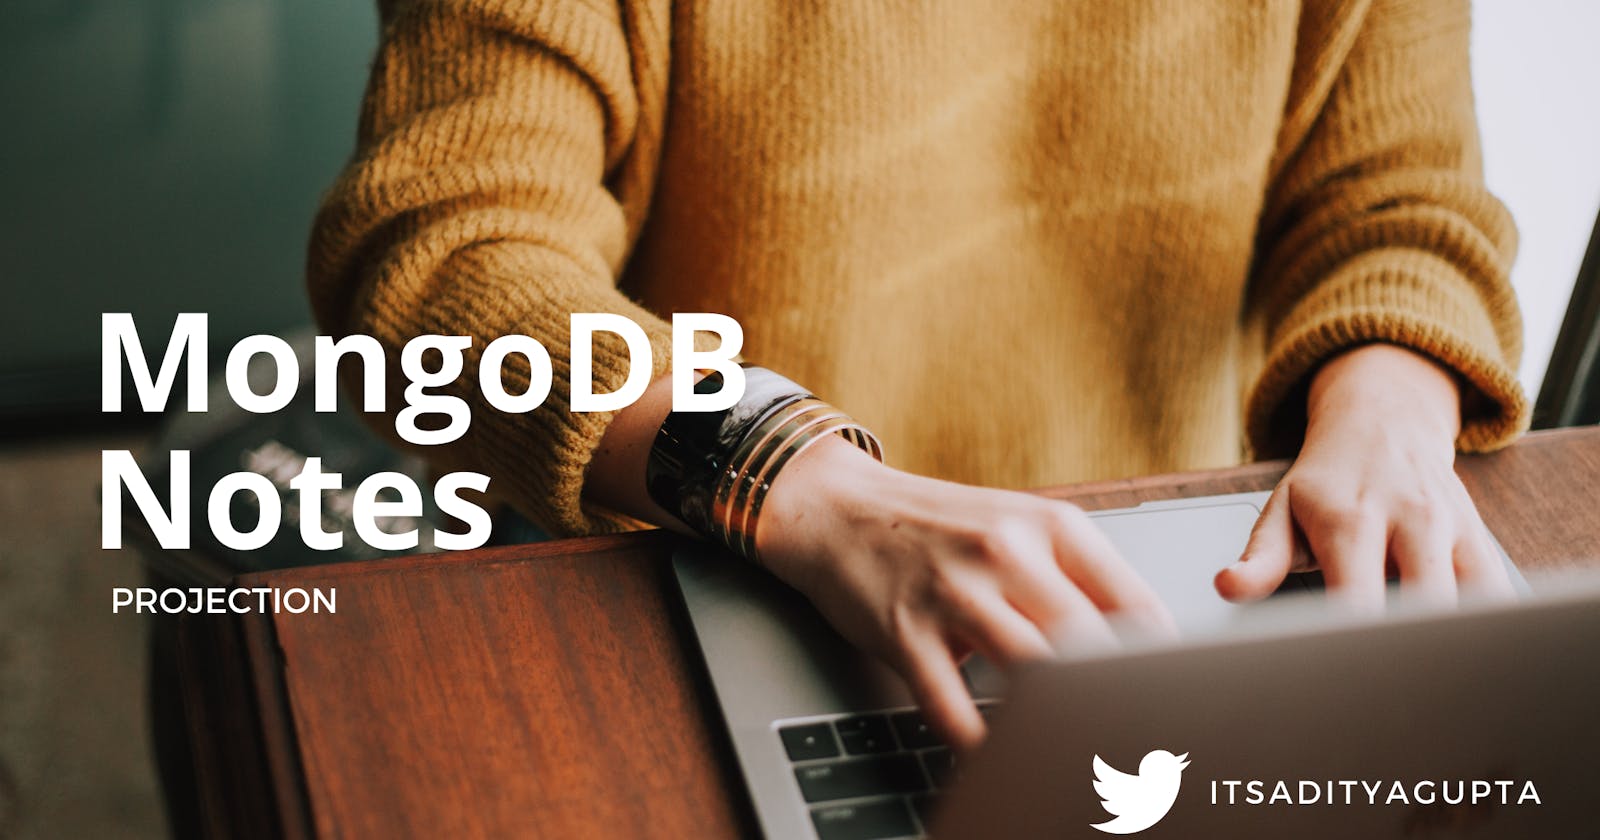 Projection in MongoDB